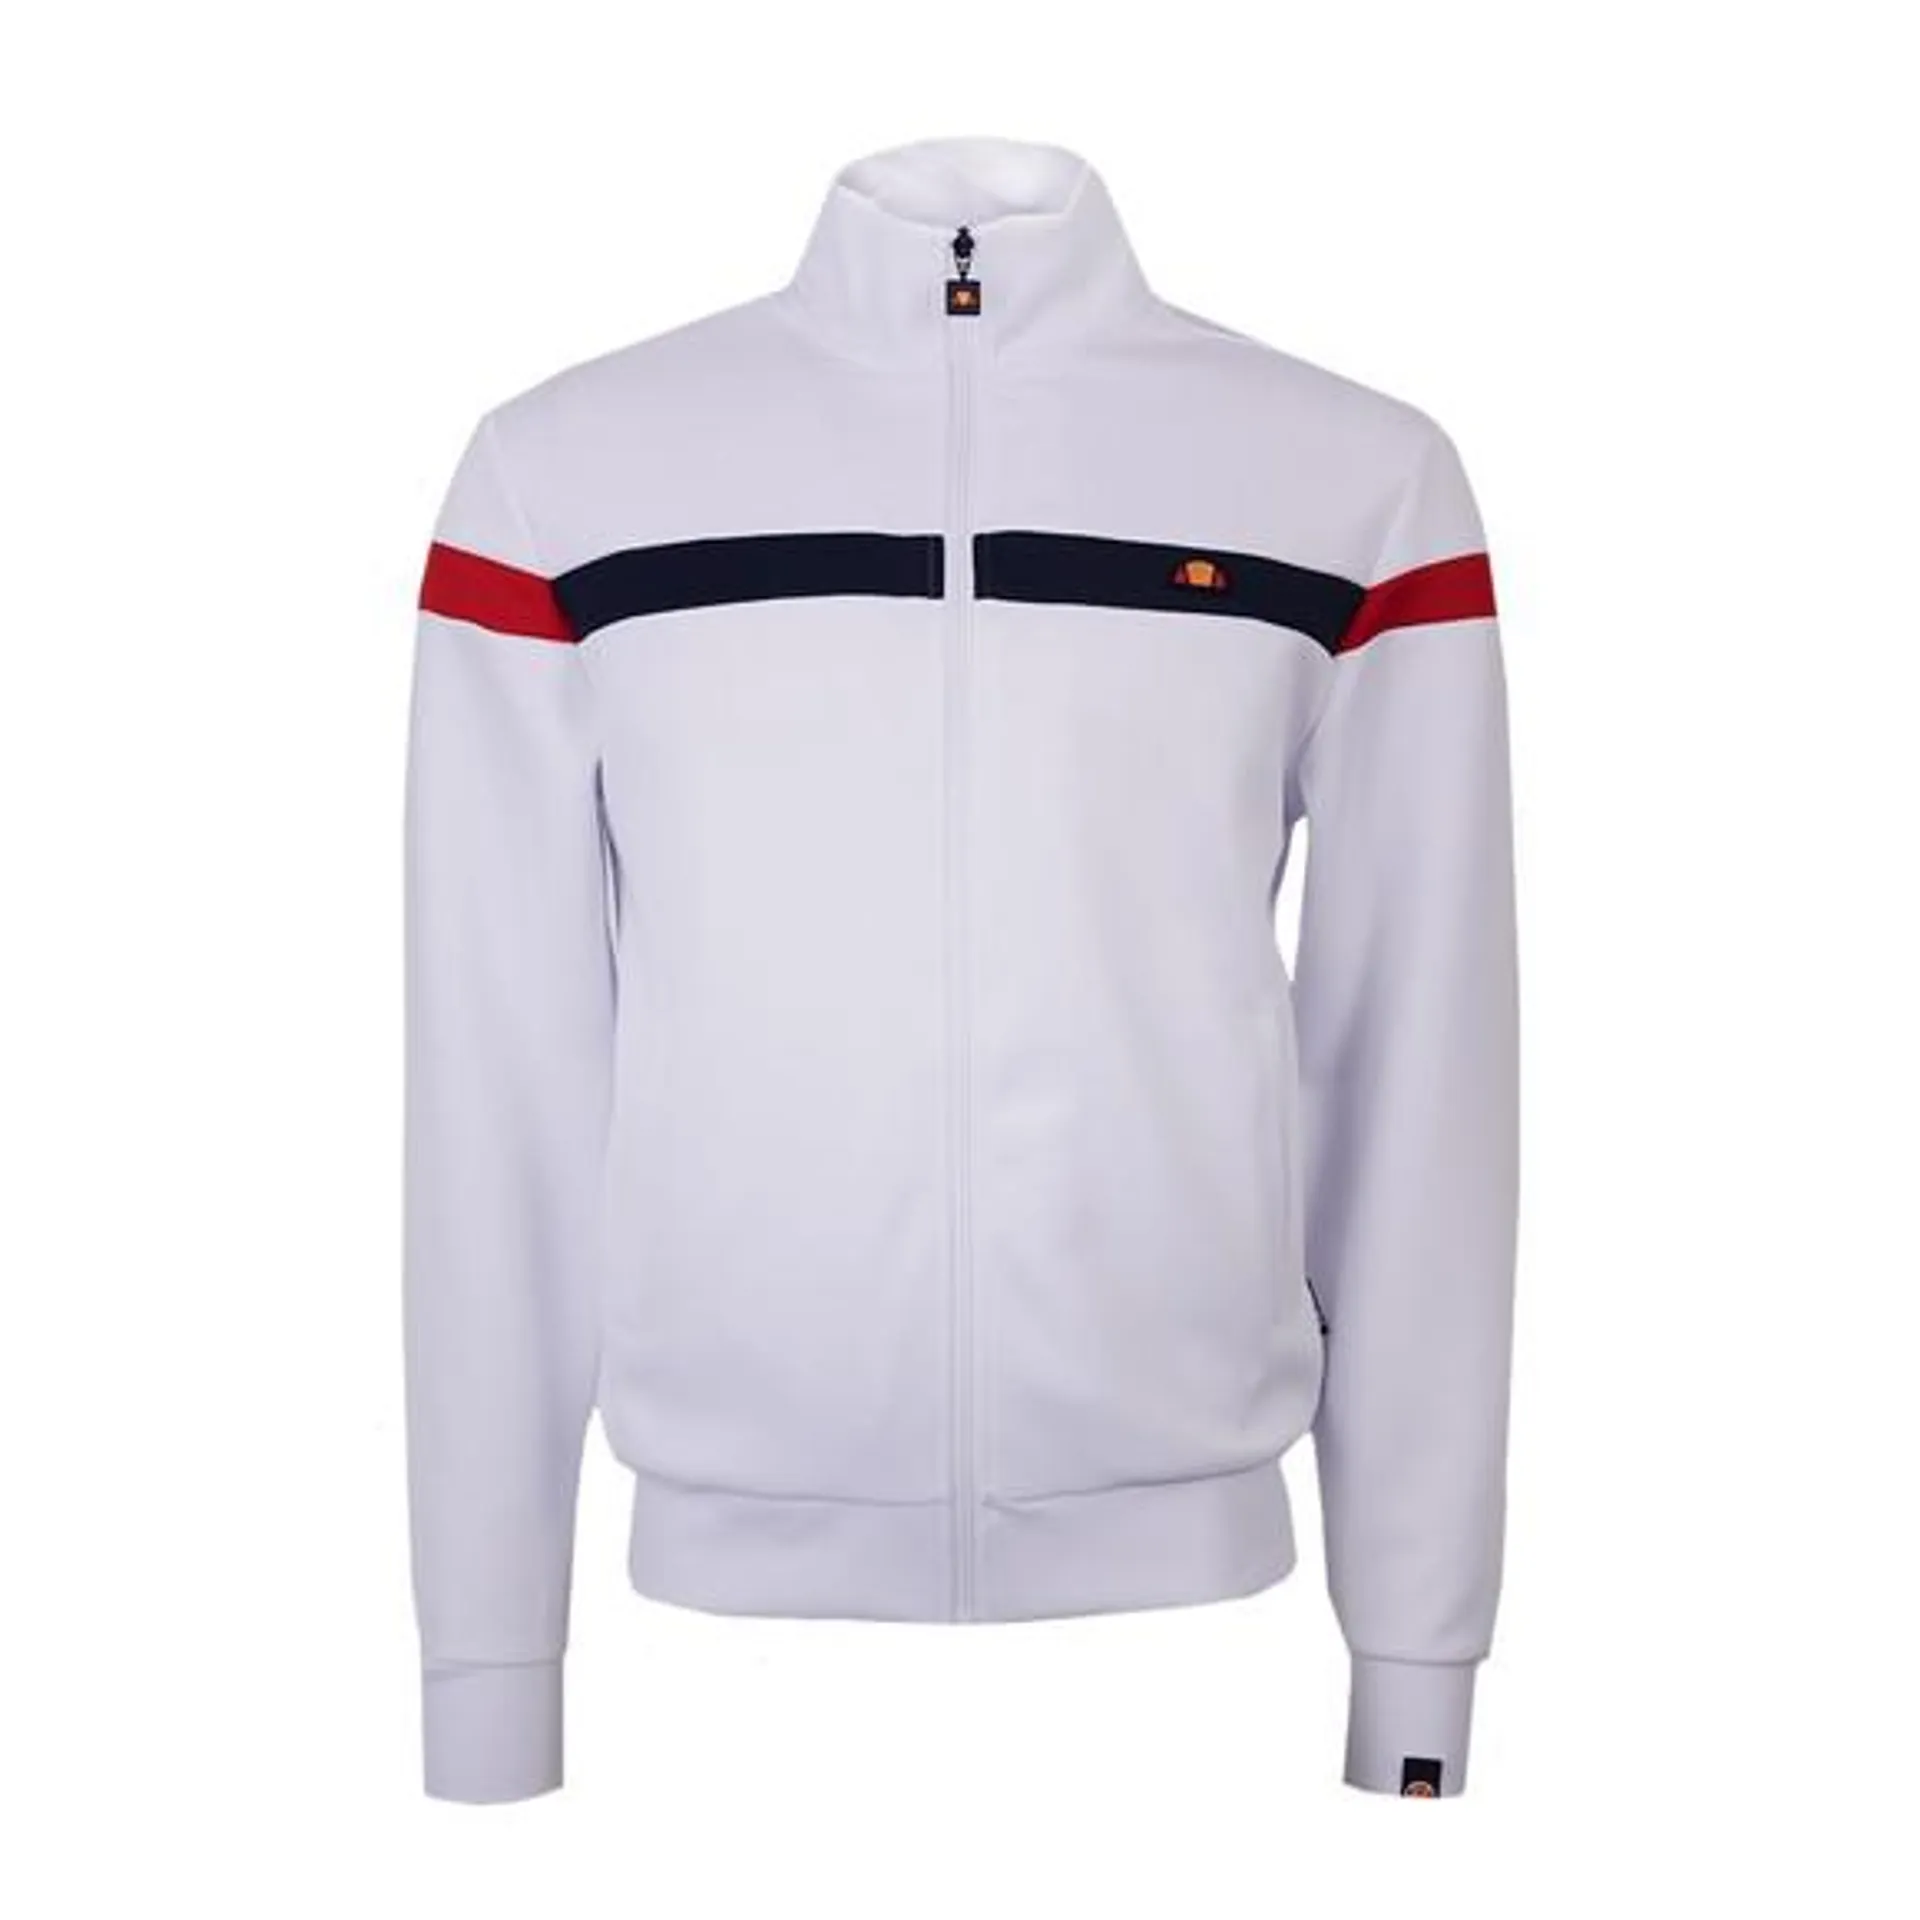 Mens White Spinella Track Top